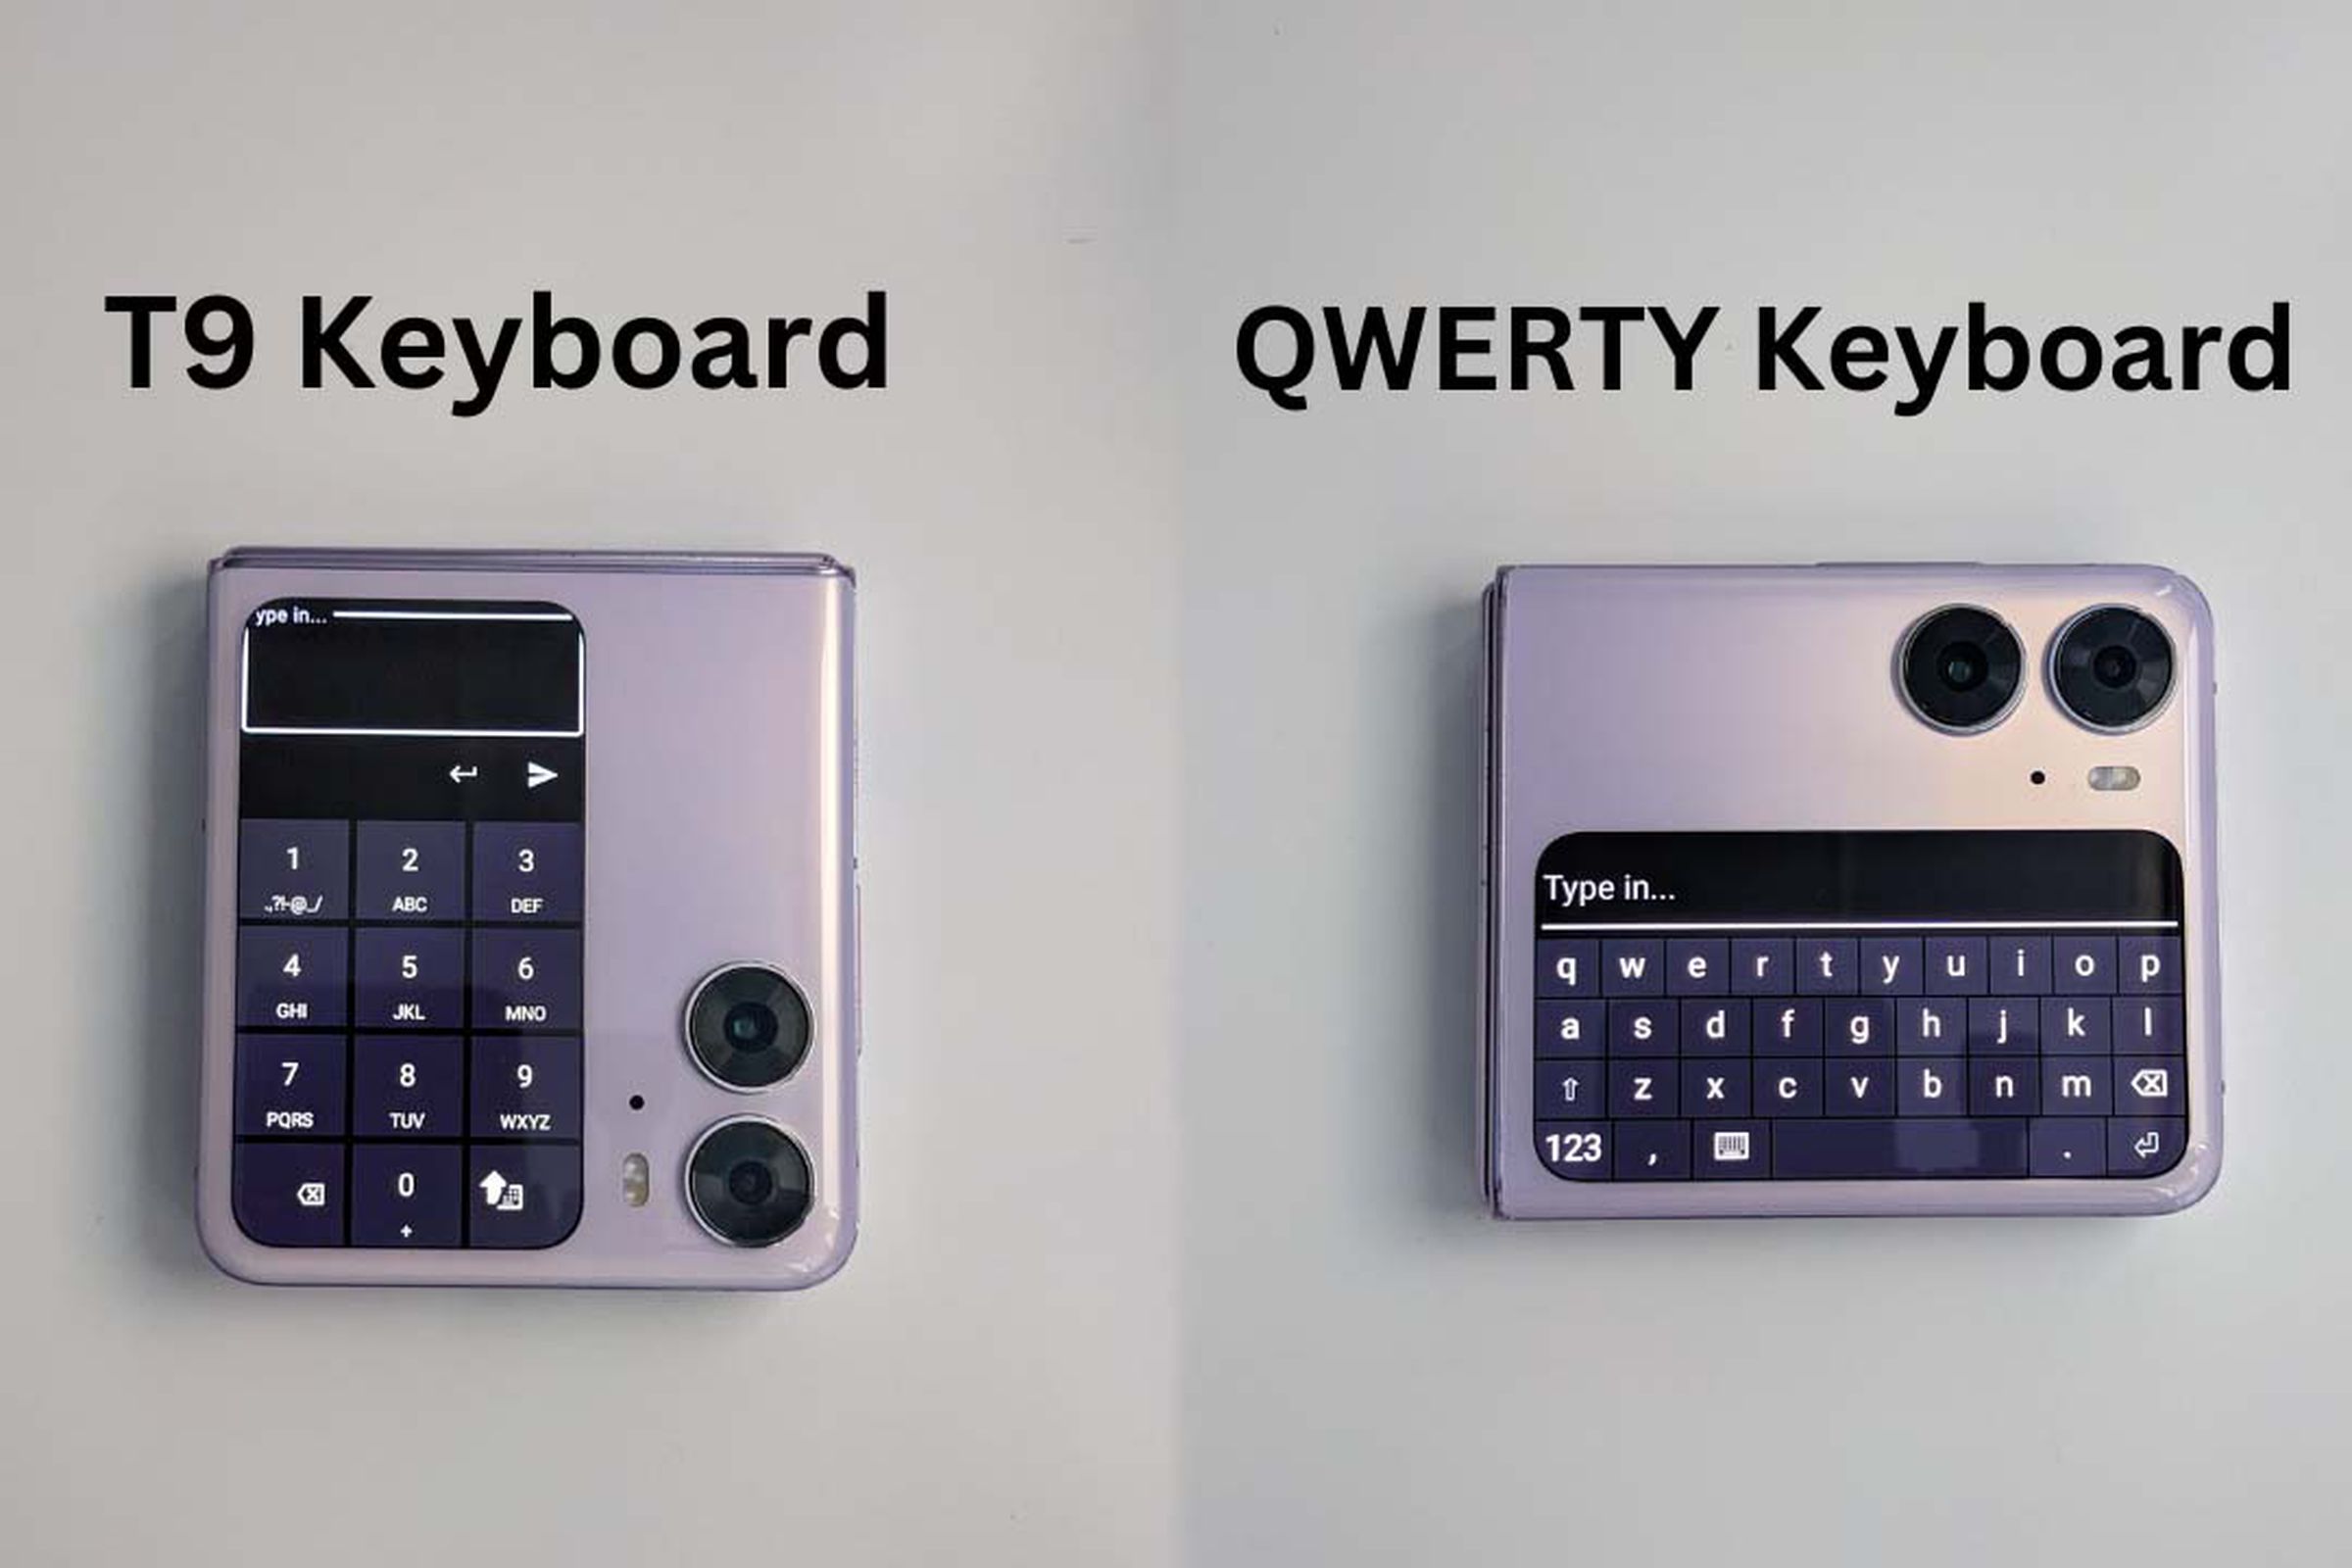 Two Find N2 Flips, one with a T9 keyboard on its cover display, and one with a Qwerty keyboard.